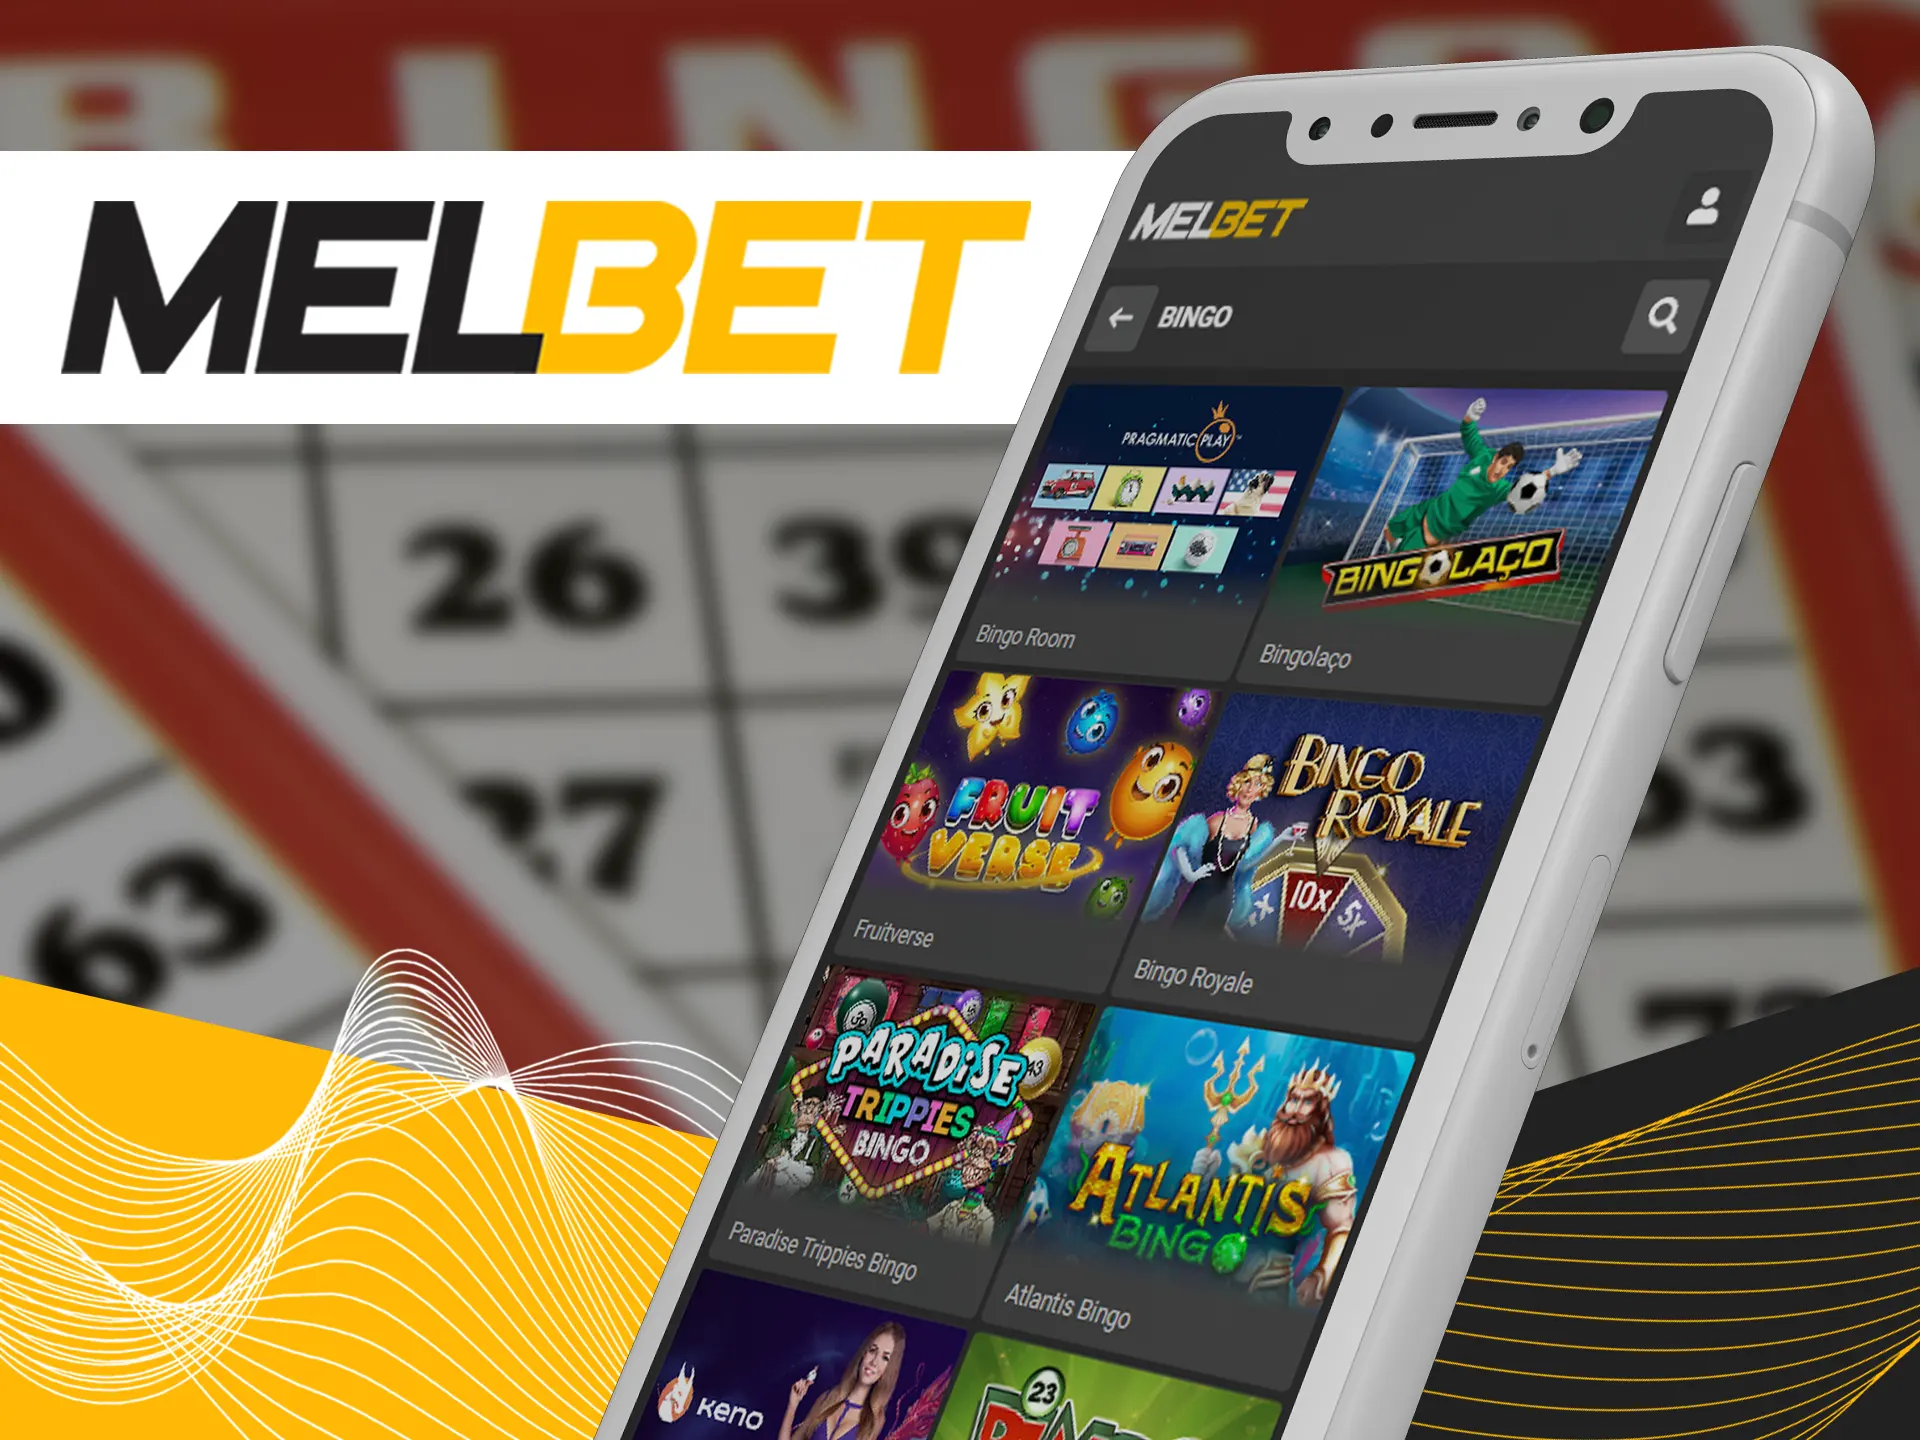 Get all of the money by playing bingo games at Melbet.